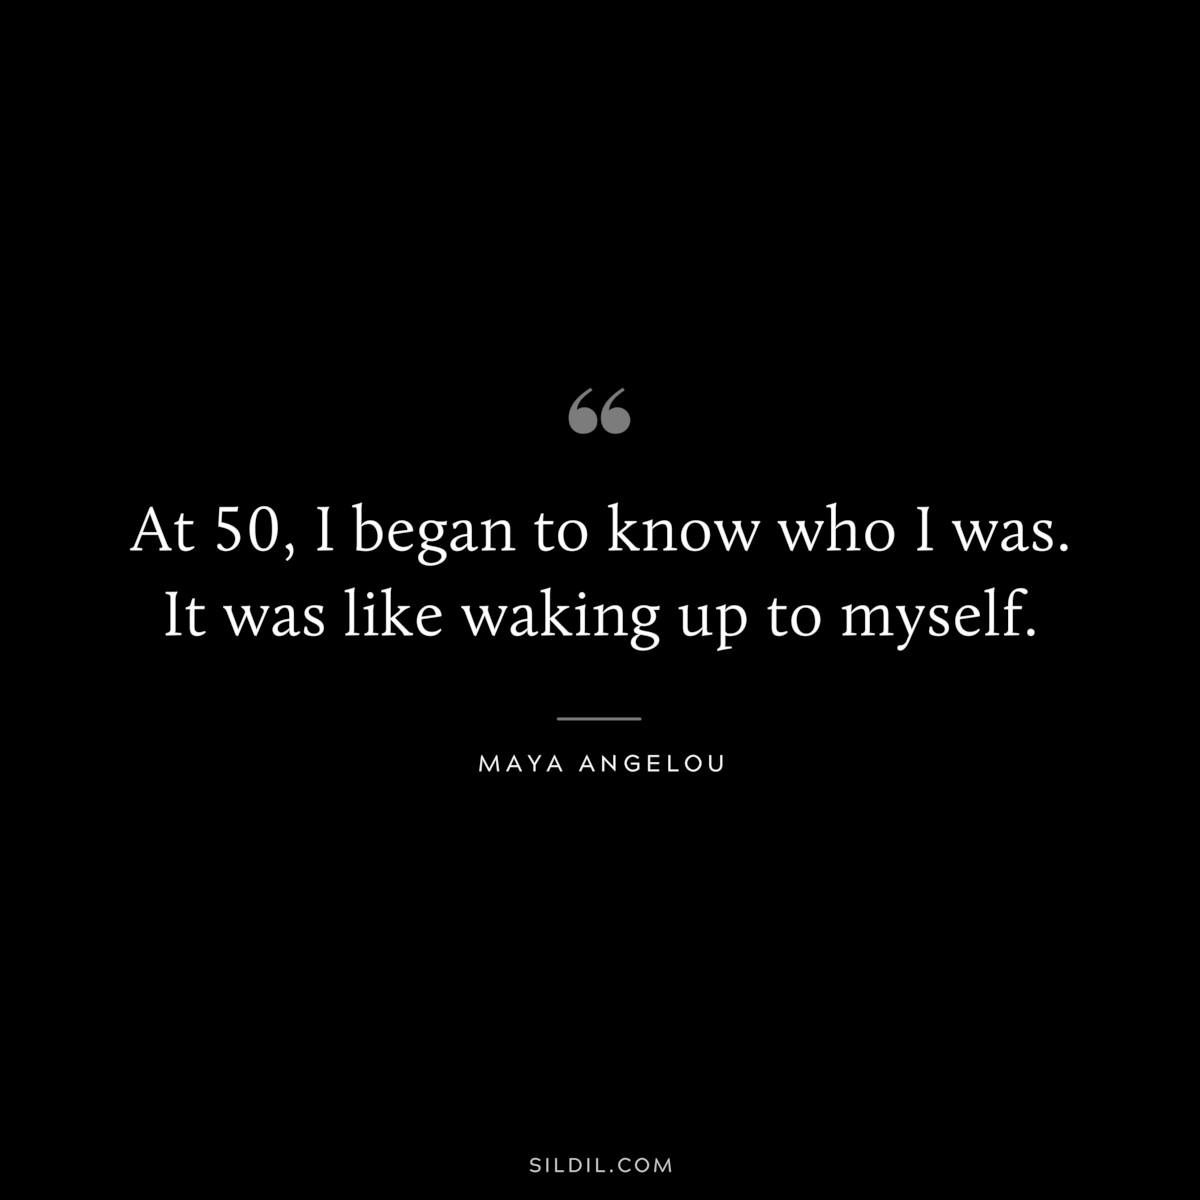 At 50, I began to know who I was. It was like waking up to myself. ― Maya Angelou